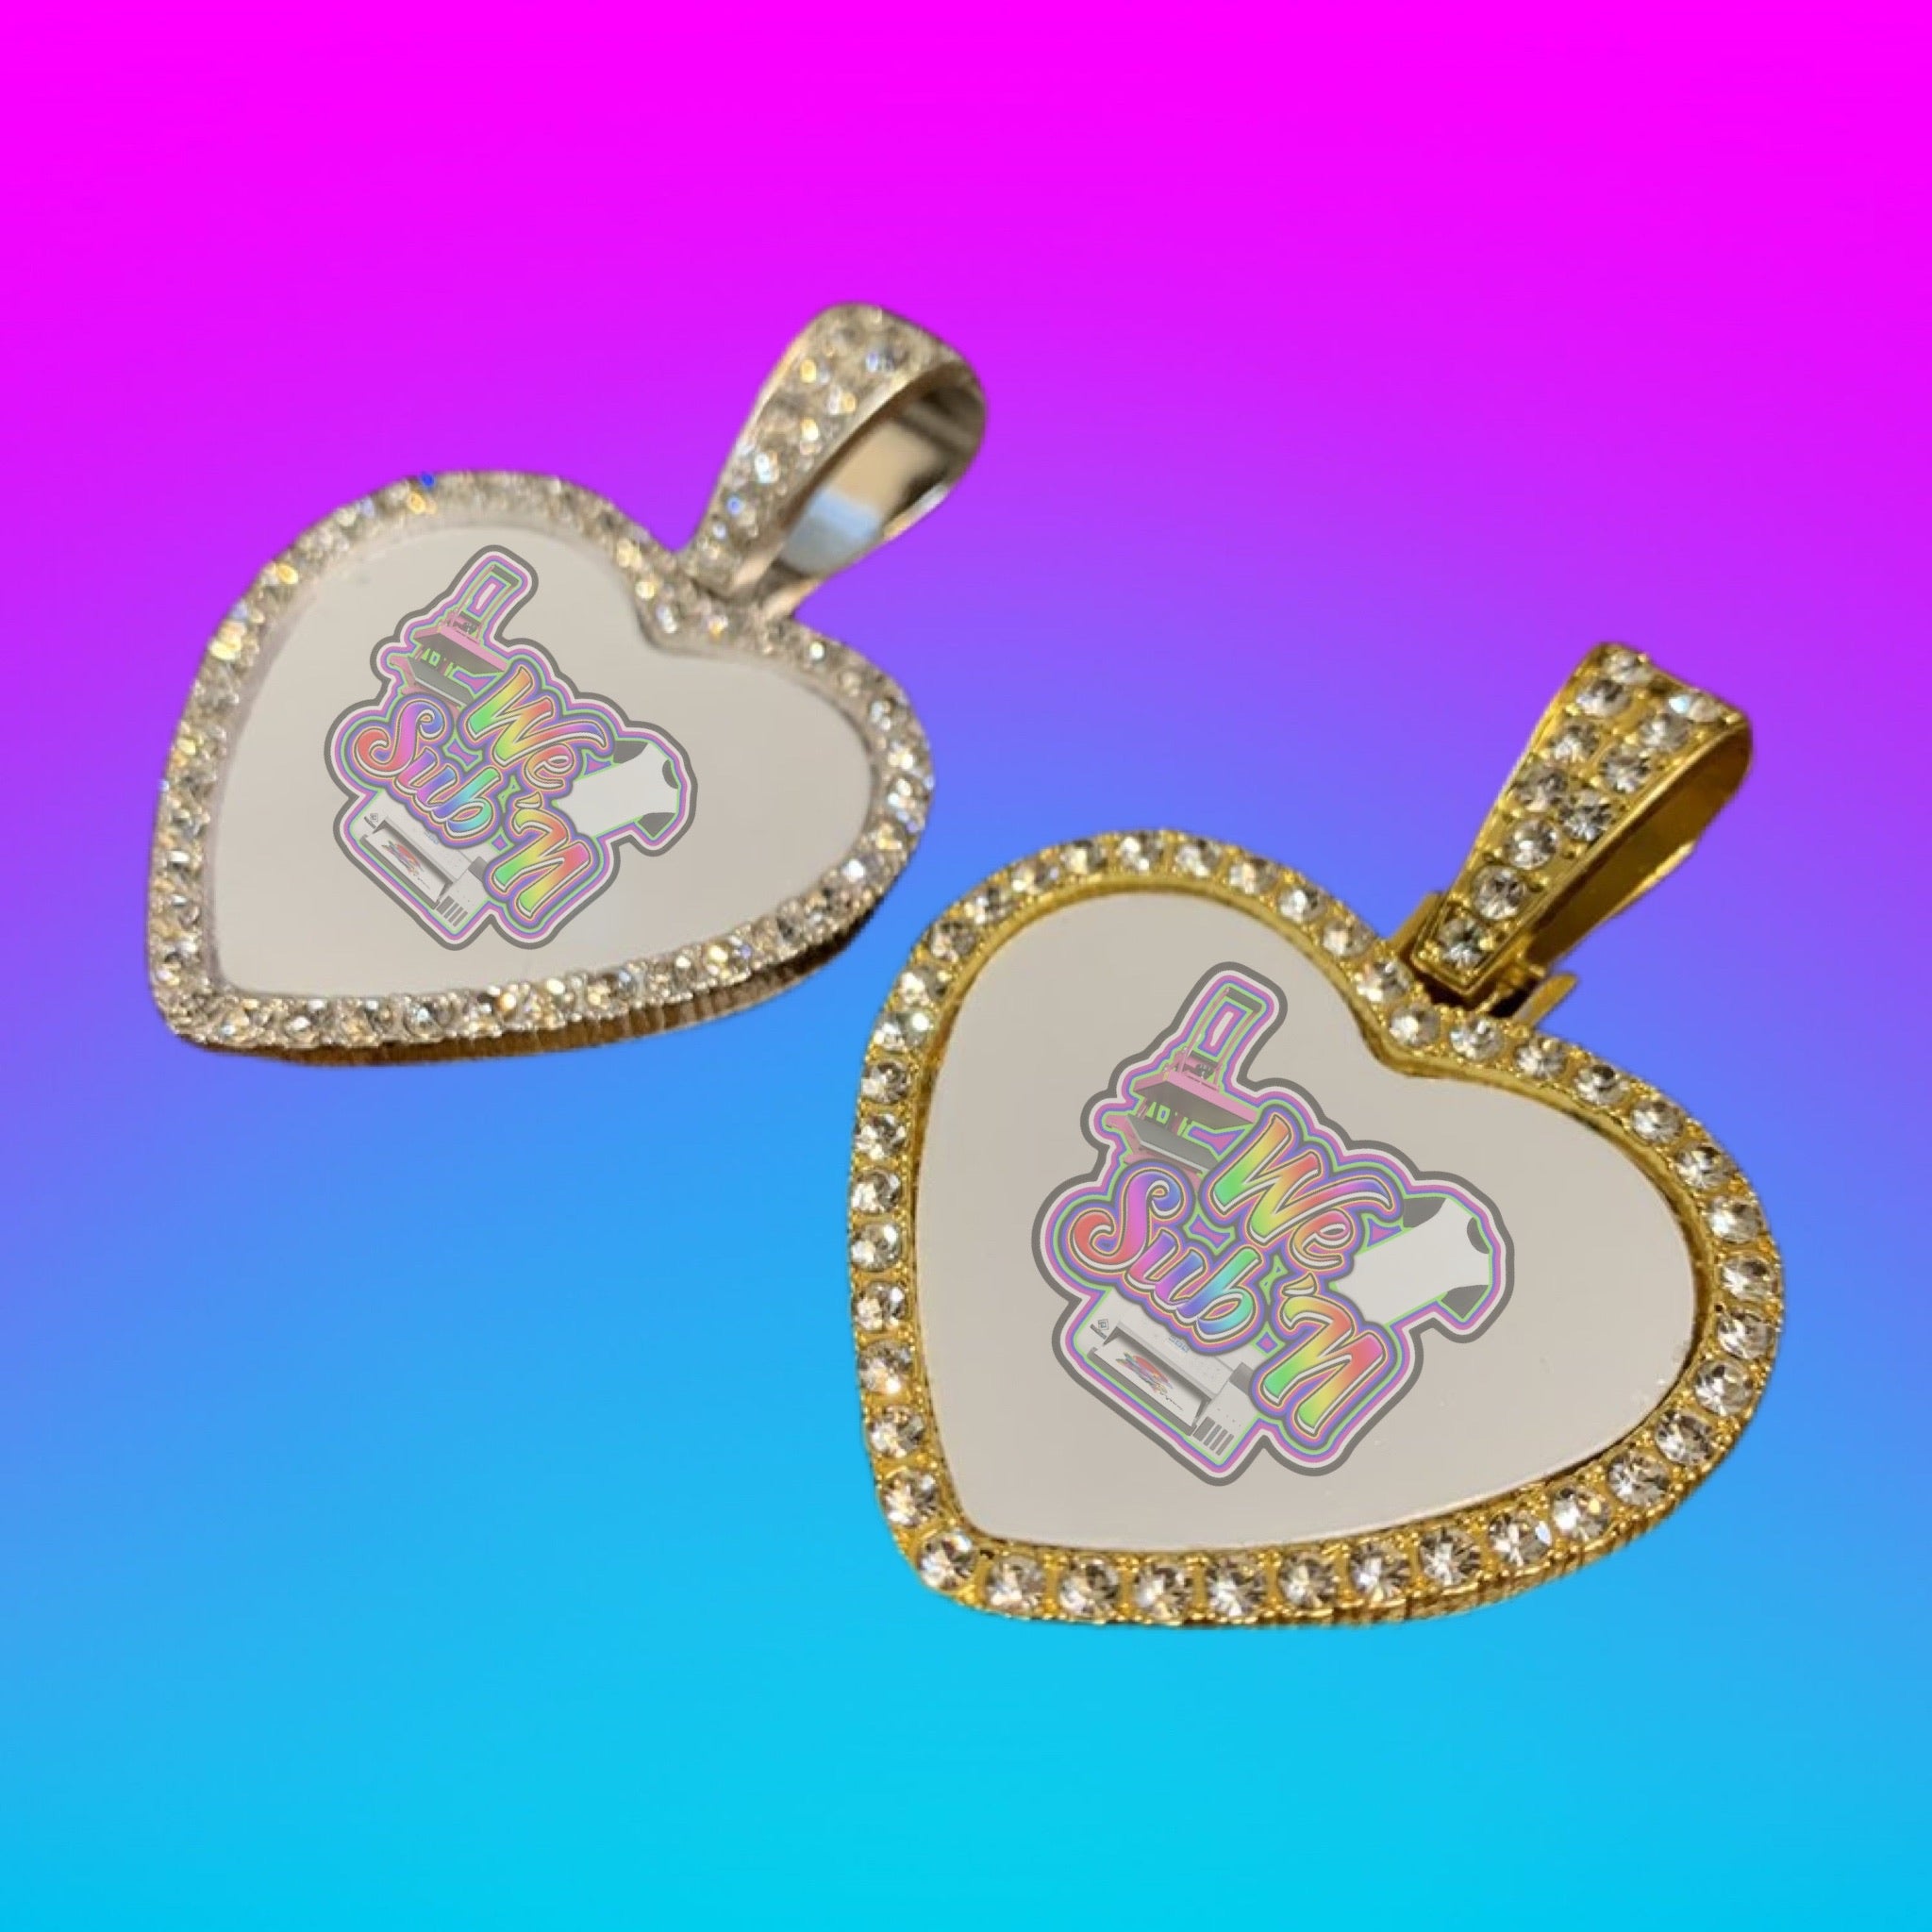 12x Heart Key Necklace Sublimation Blanks Heart Necklace 25mm